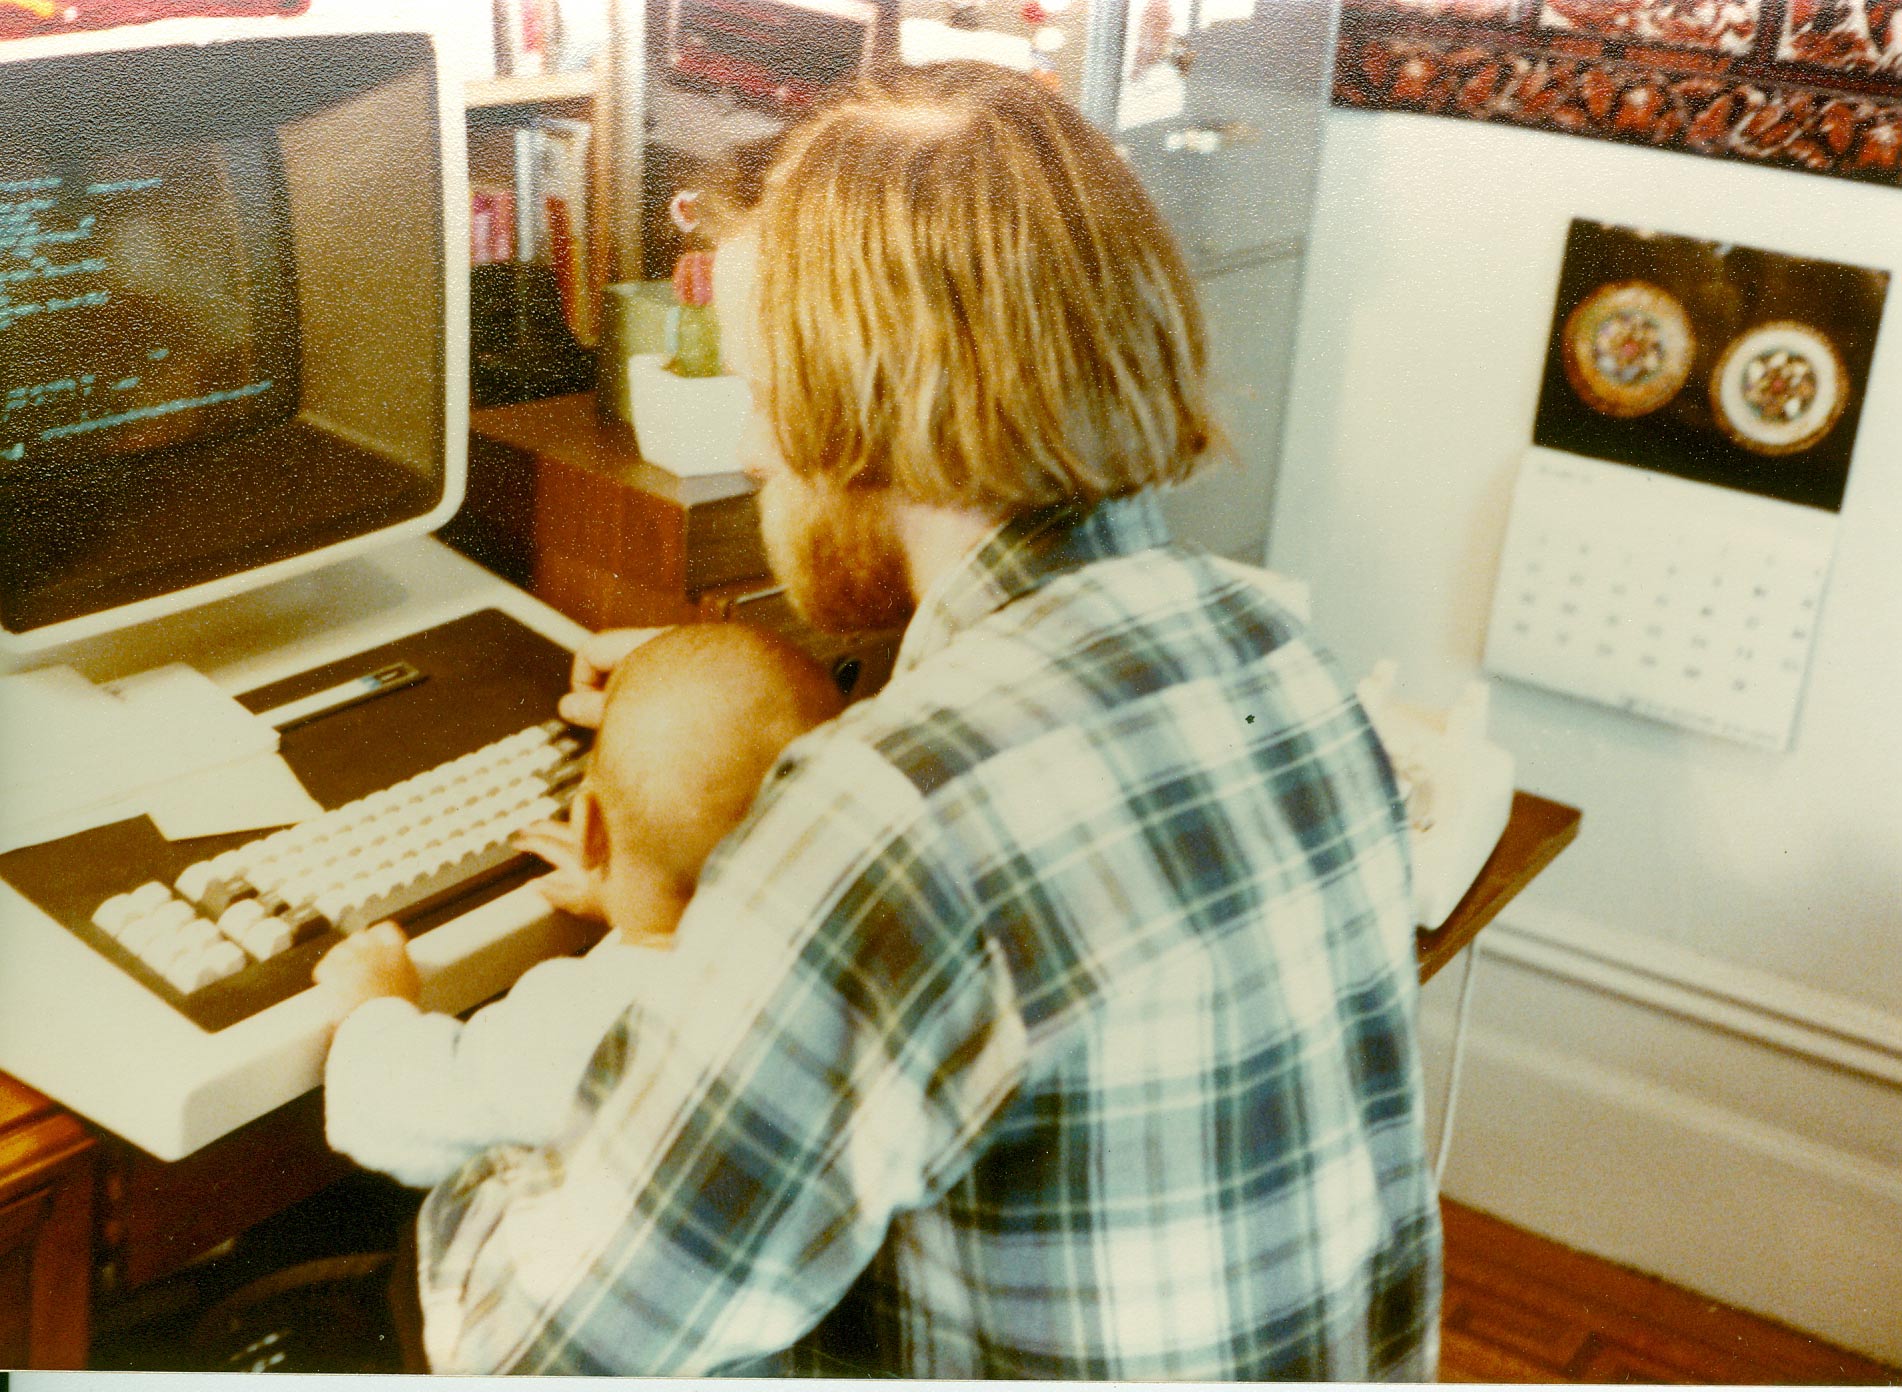 Working at home 1977